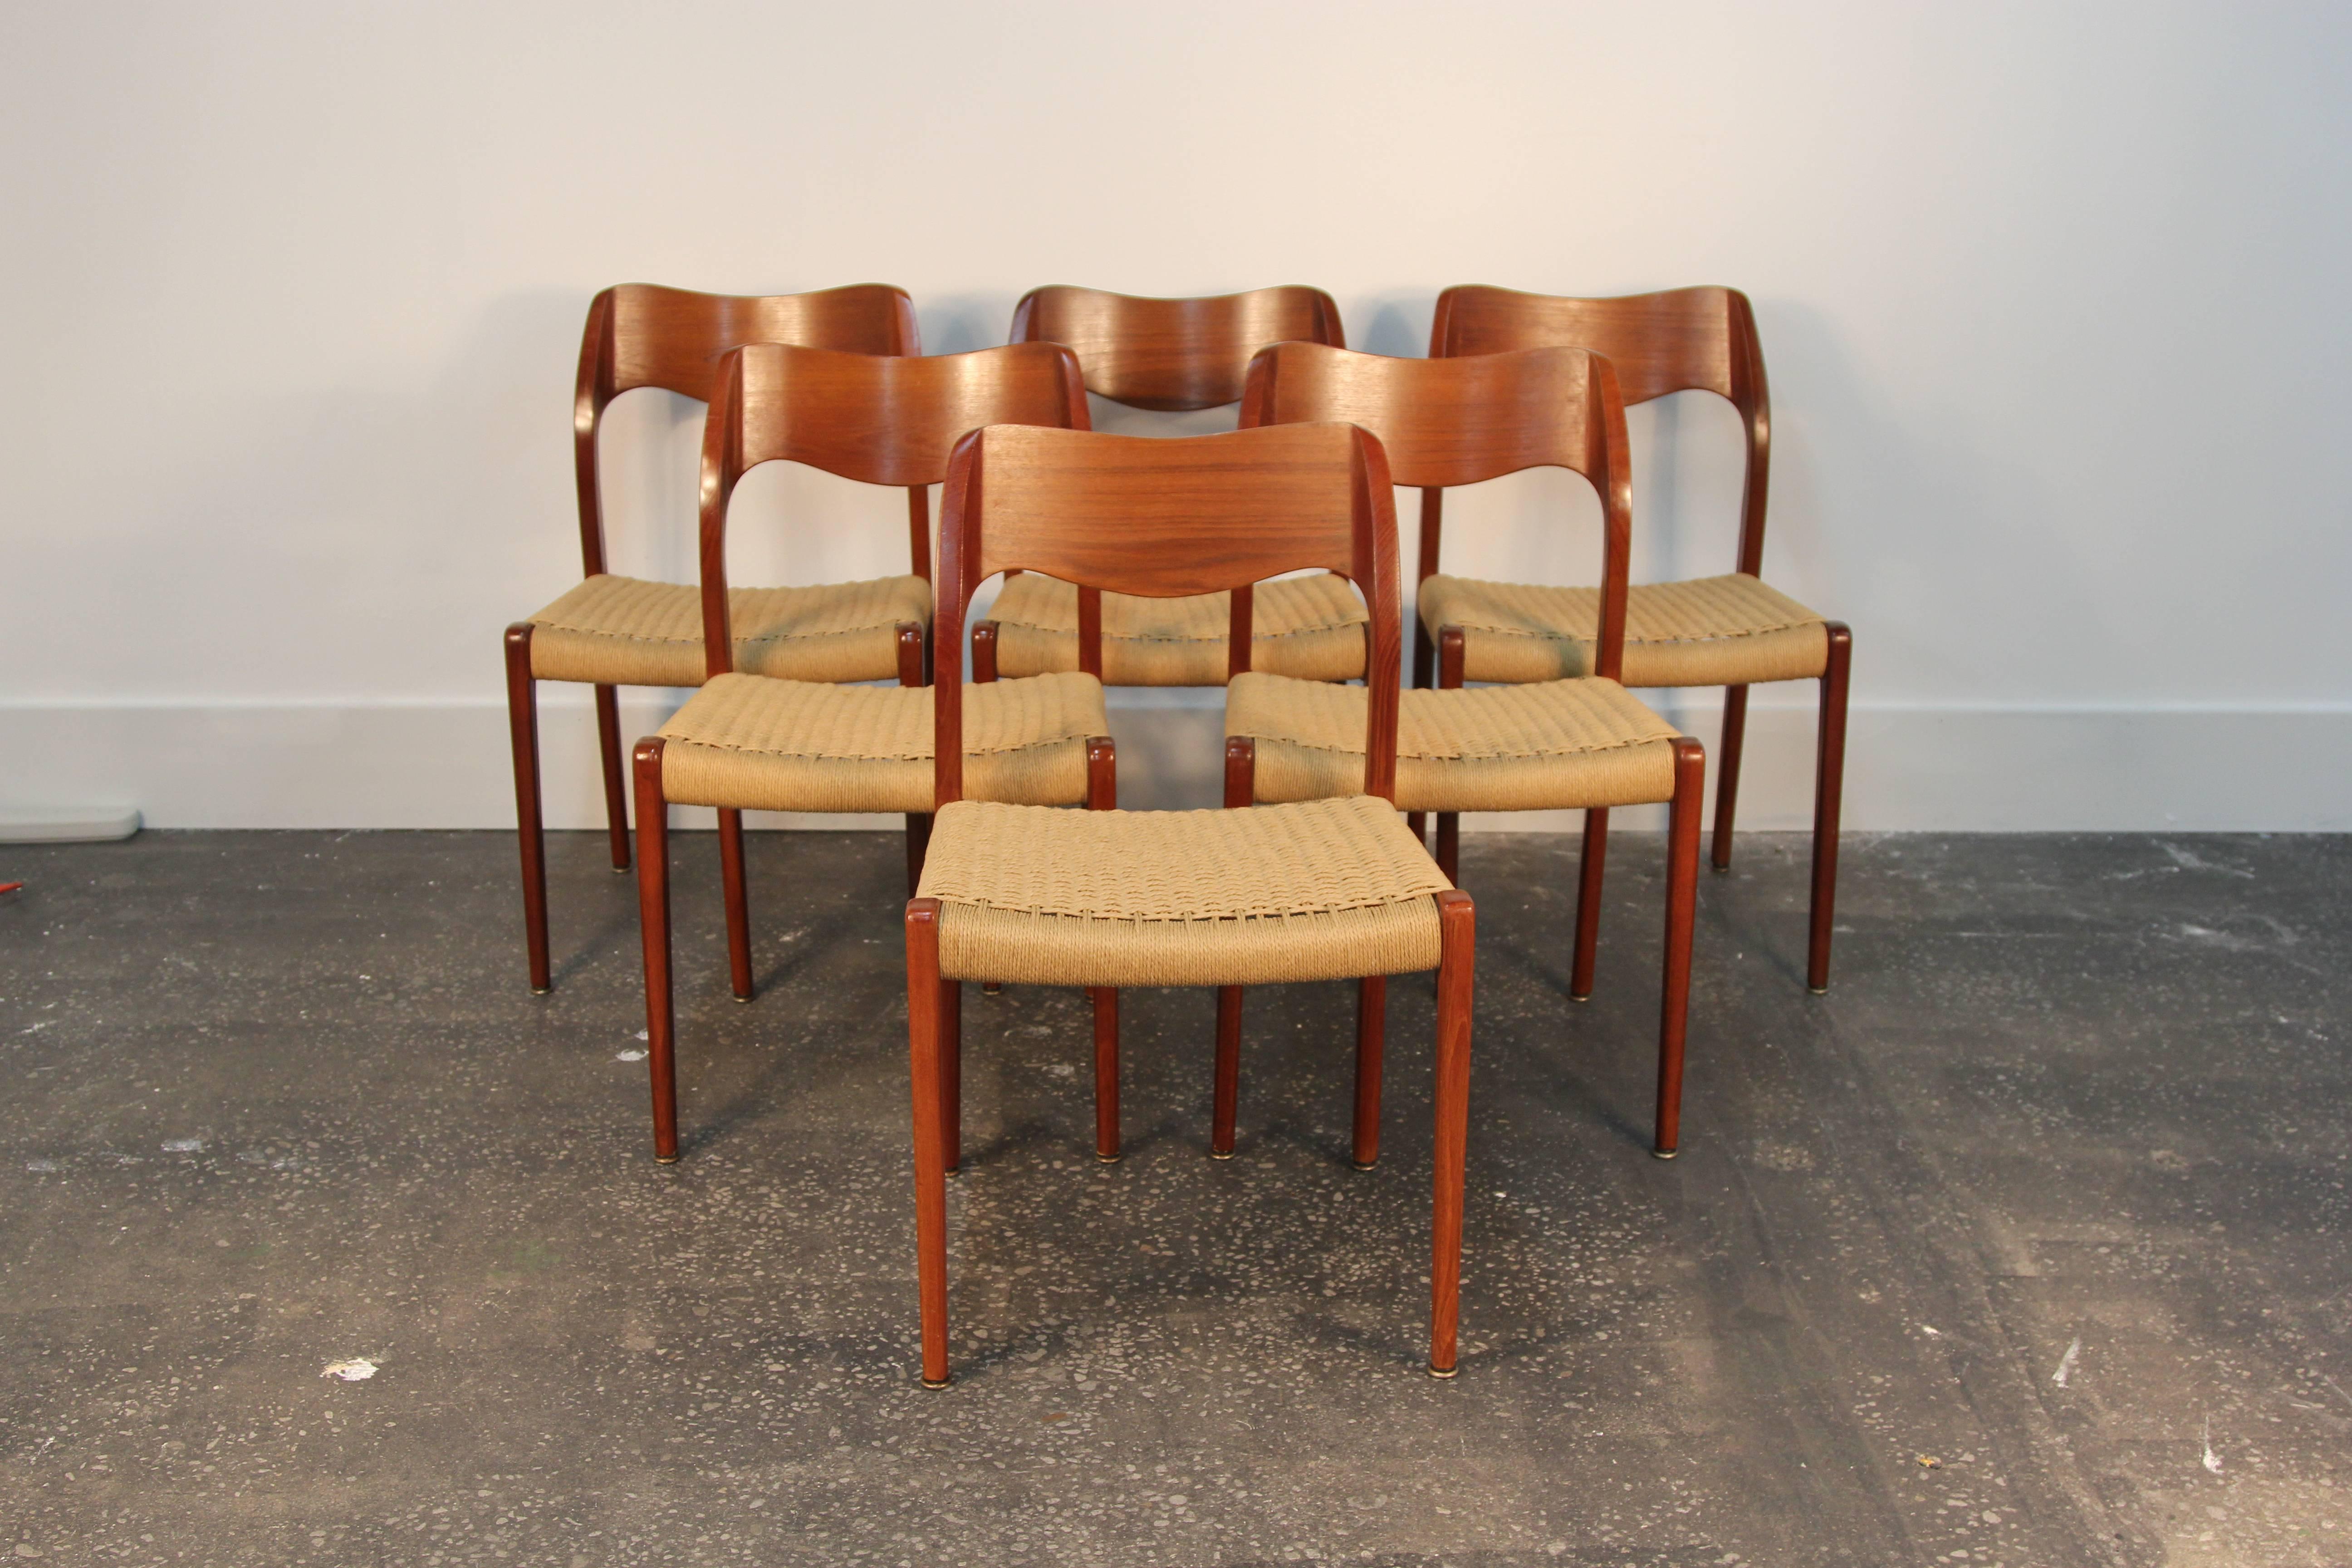 Beautiful set of 6 Model 71 teak dining chairs with danish chord seats.  Designed by Niels Otto Moller for J.L. Moller Co.  In excellent condition, paperchord seats recently redone and in perfect condition.  Gorgeous teak rich color.